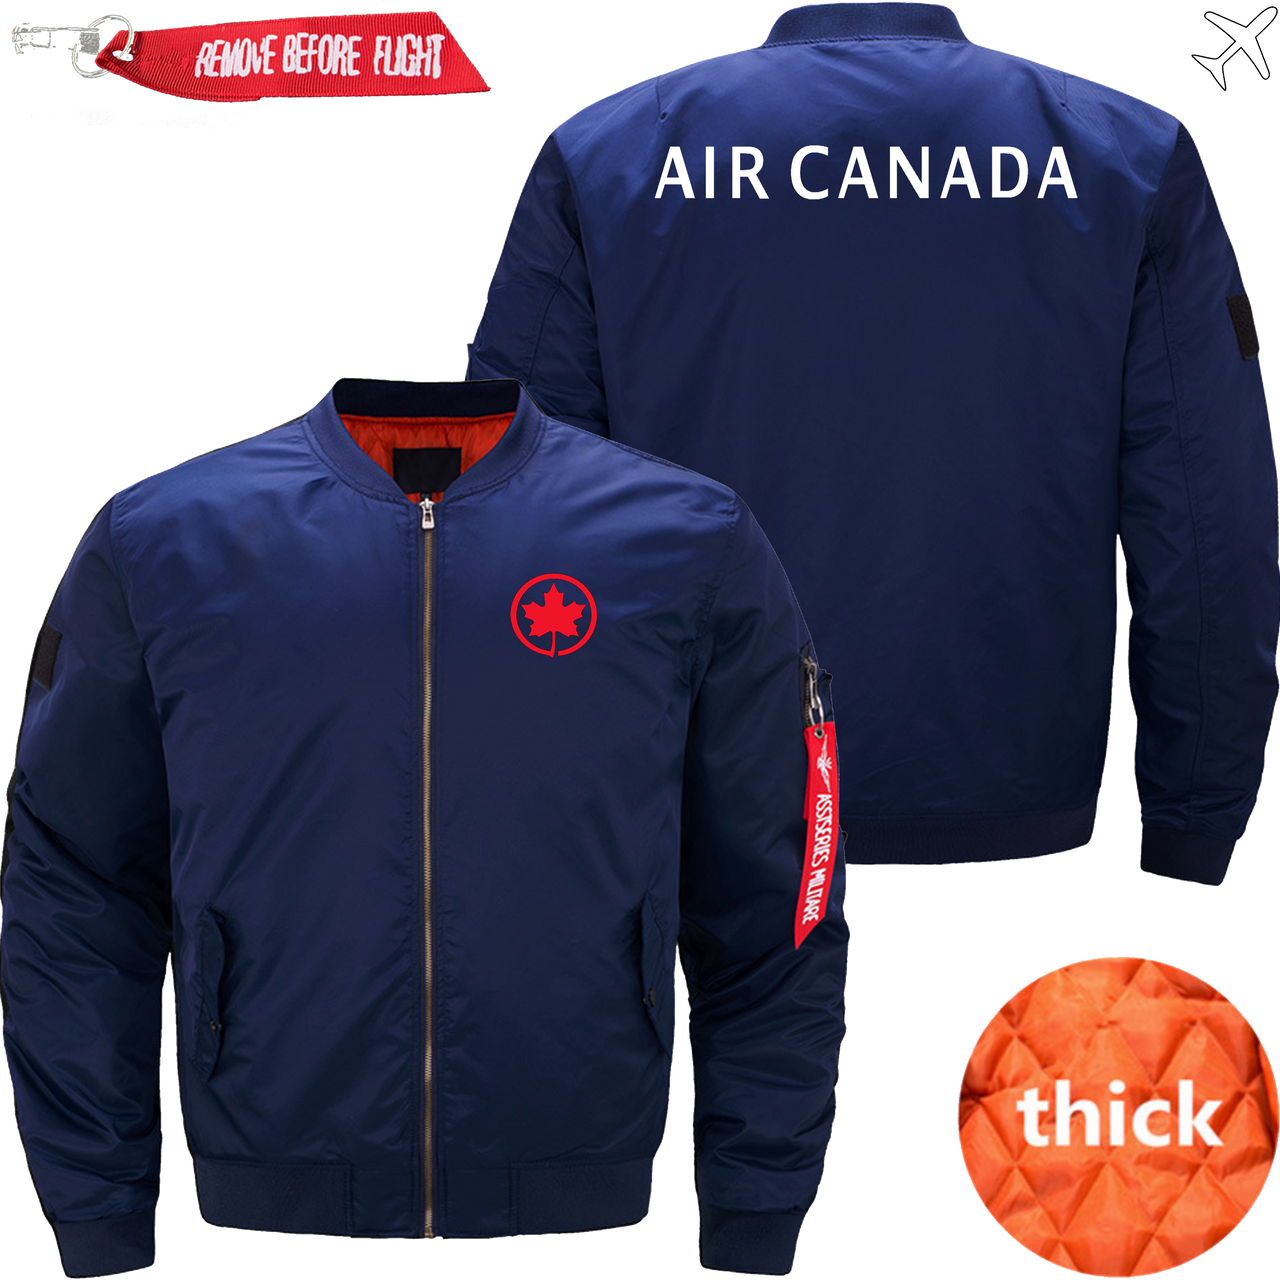 CANADA AIRLINE JACKET